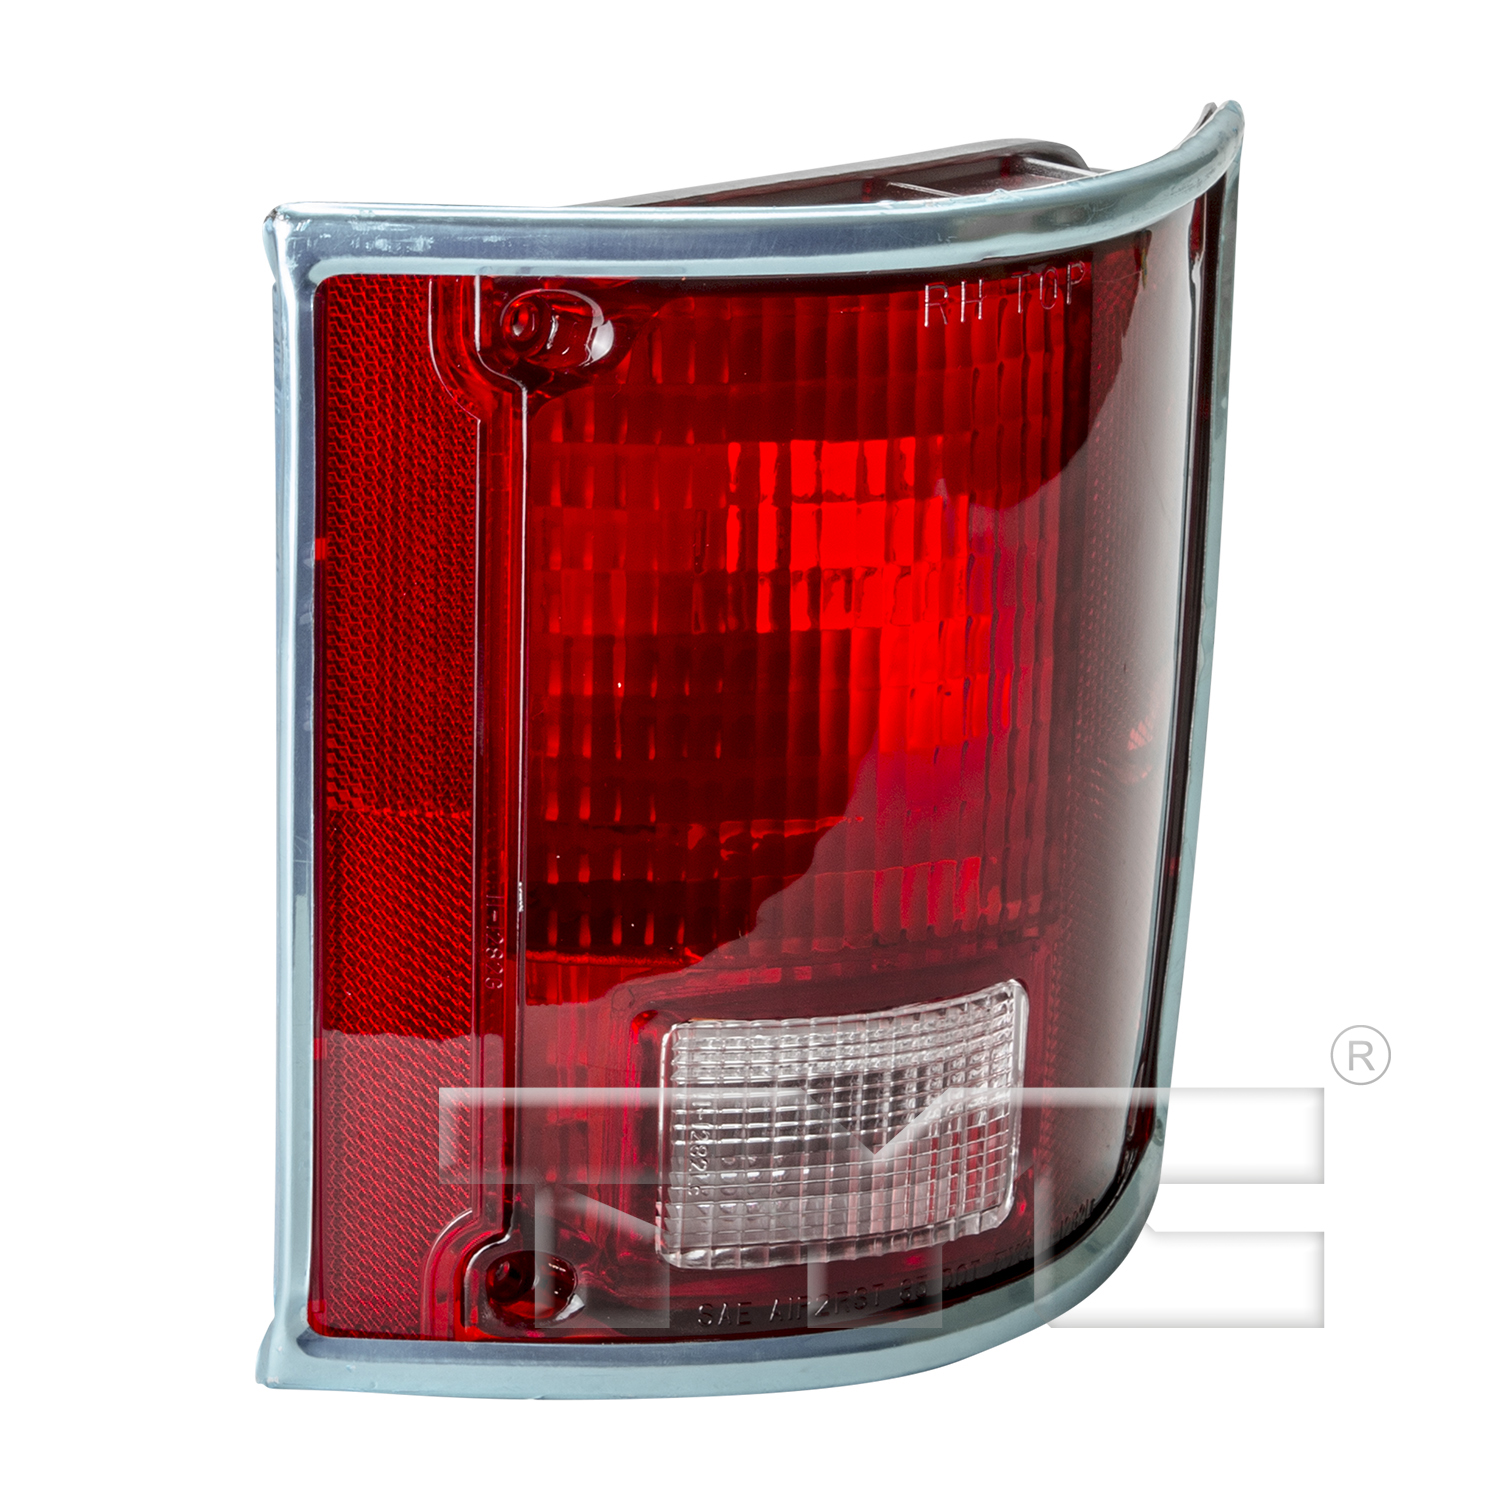 Aftermarket TAILLIGHTS for GMC - C15, C15,78-78,RT Taillamp assy